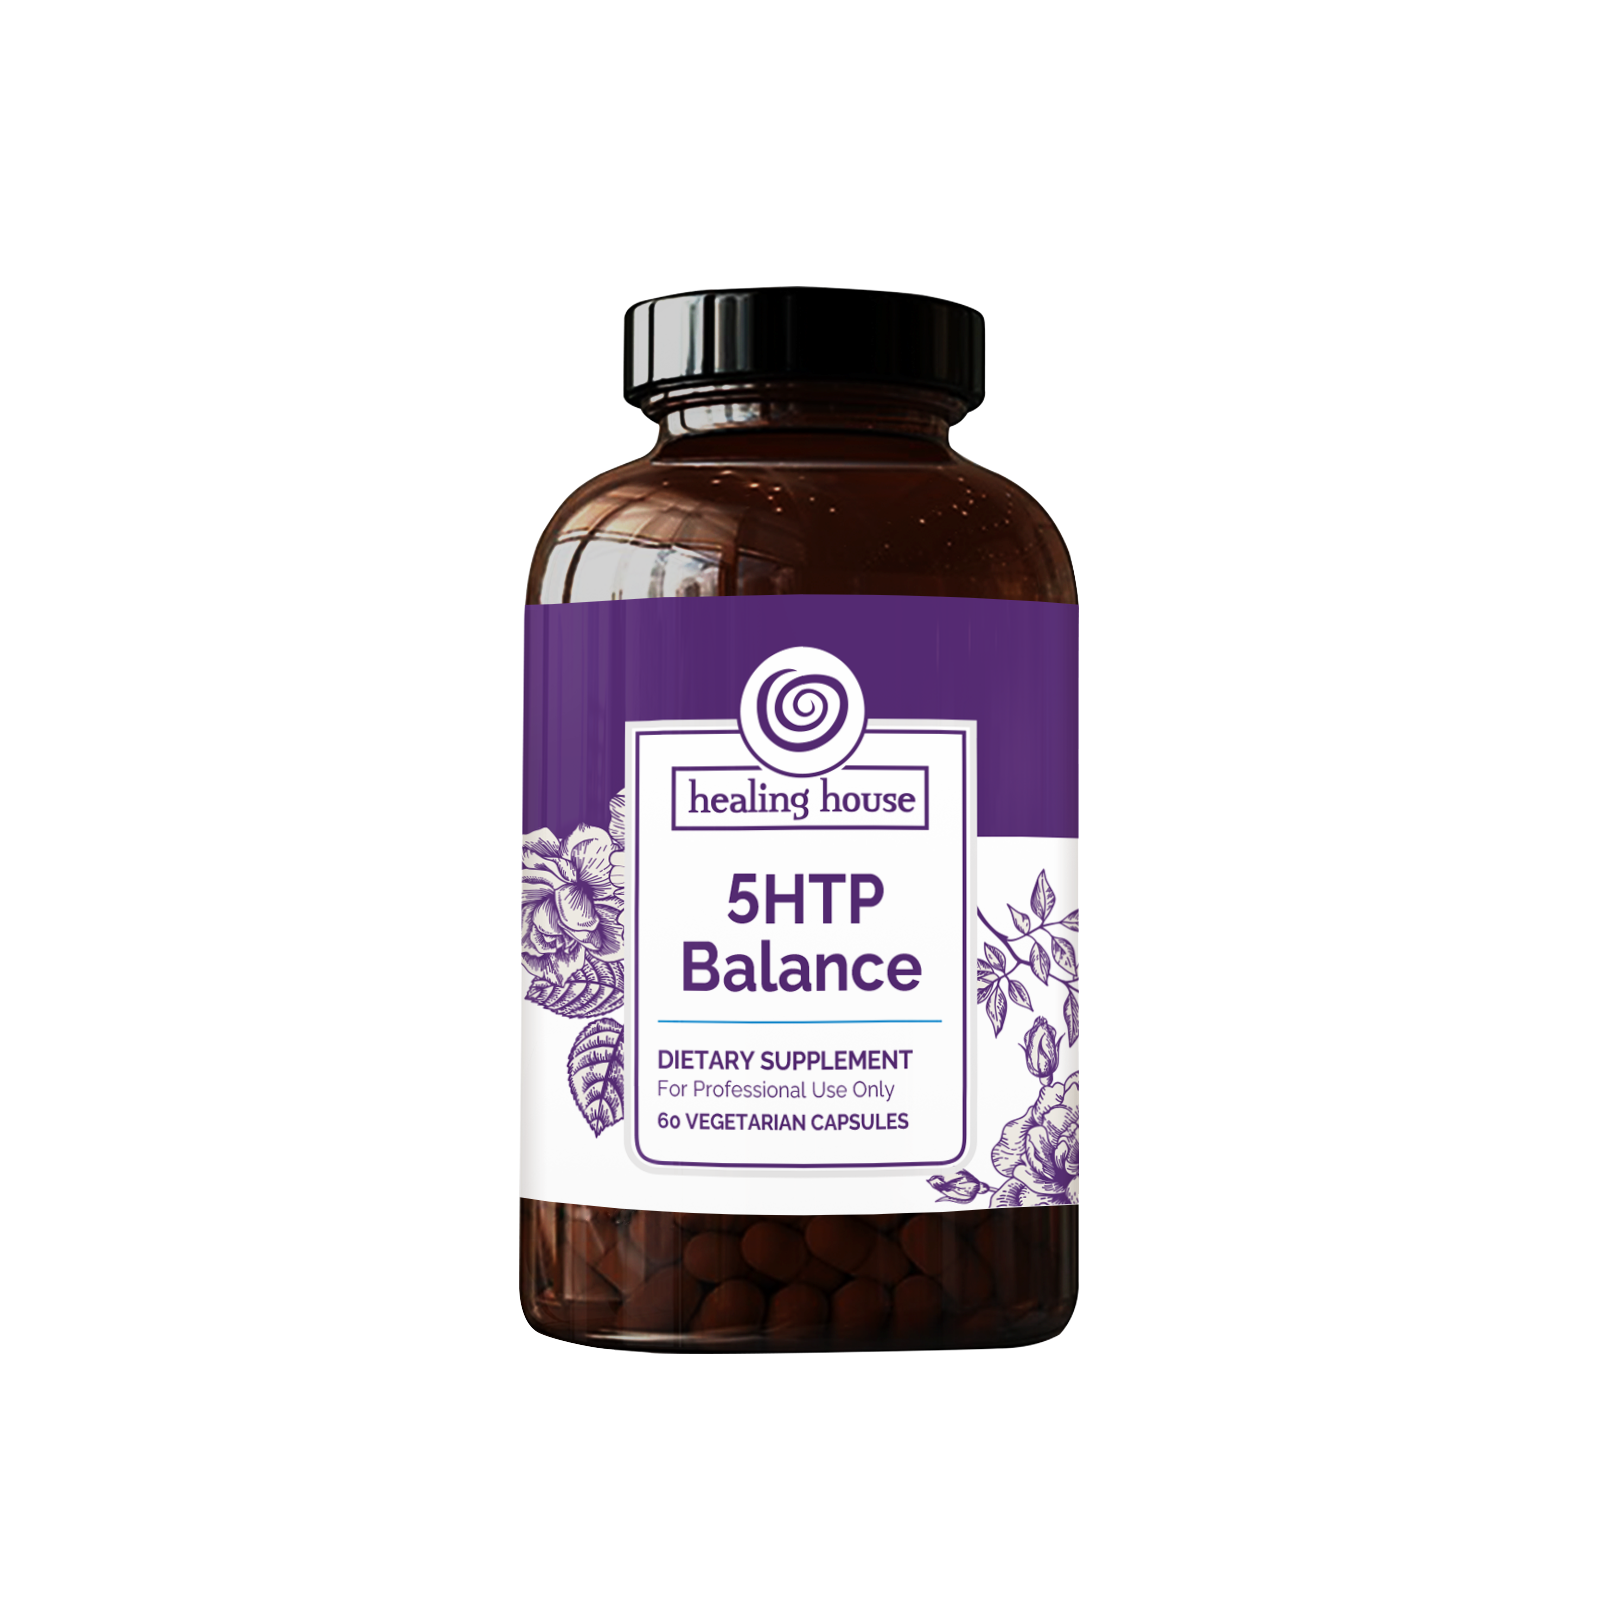 5HTP Balance product container front